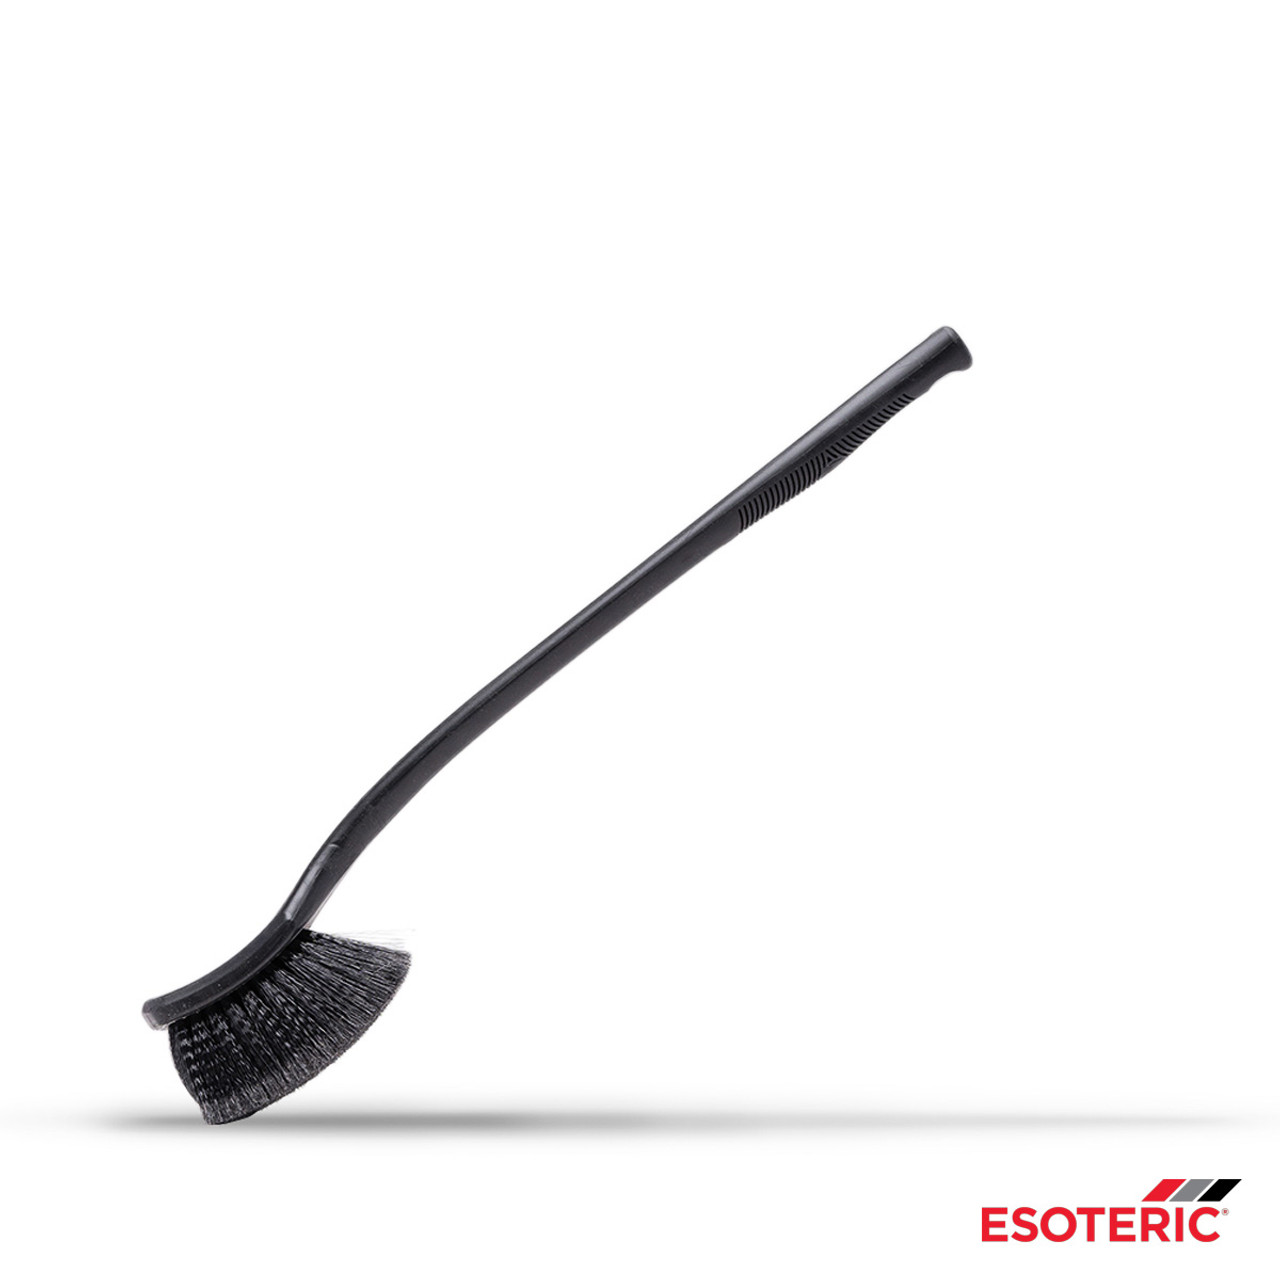 Esoteric Tire Brush - ESOTERIC Car Care